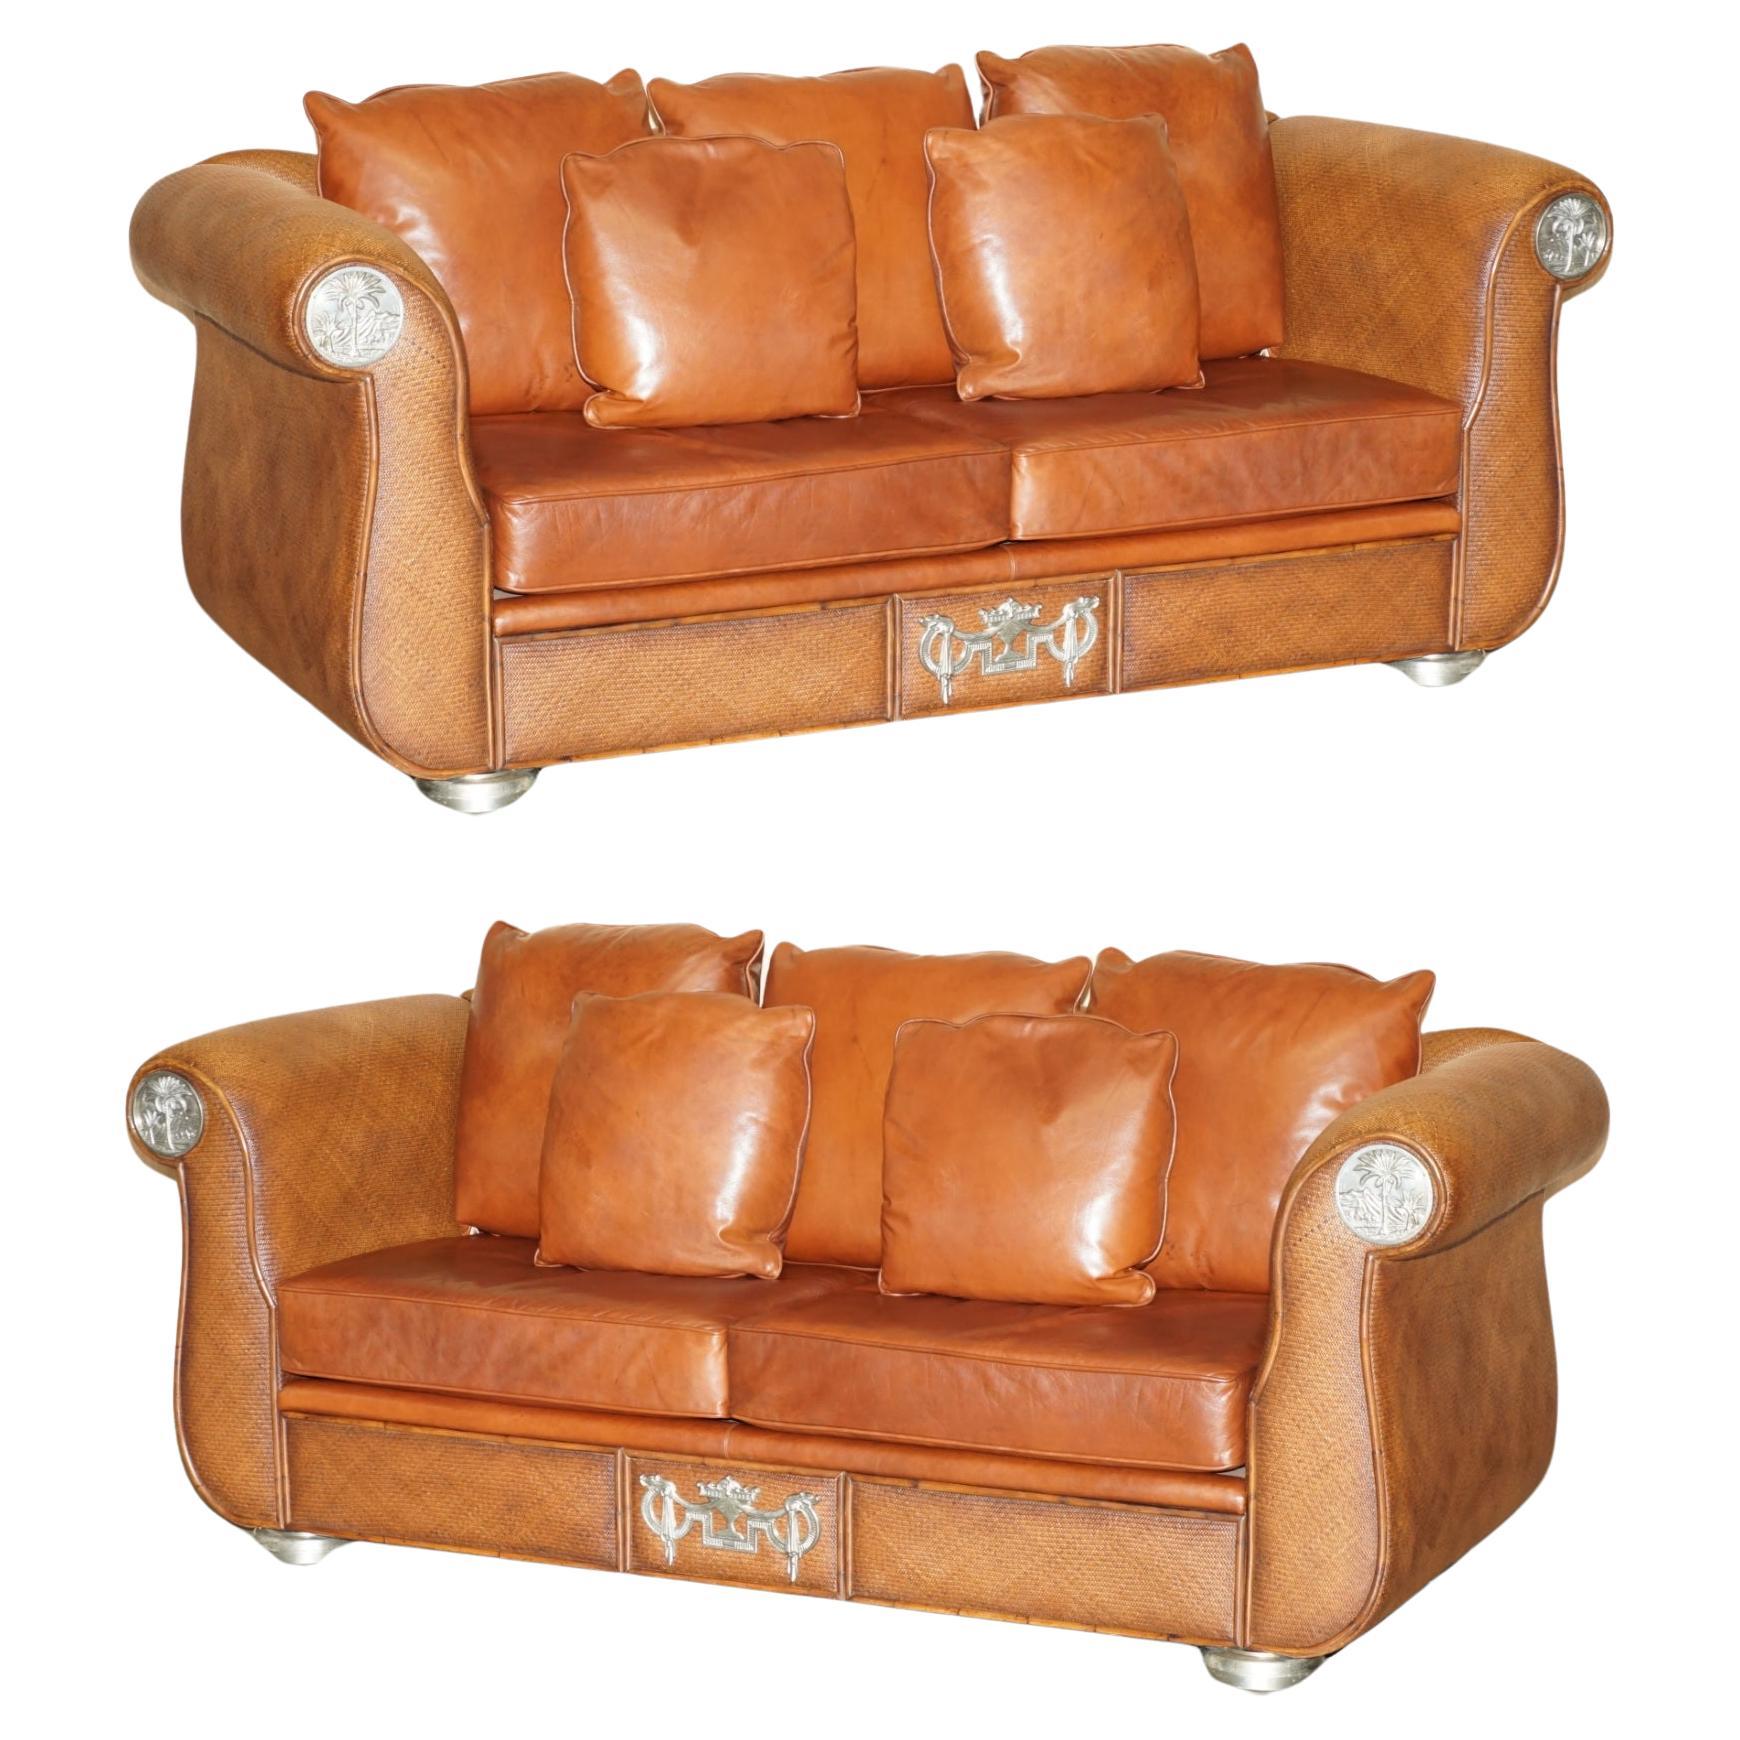 RARE PAIR OF THOMASVILLE SAFARI BROWN LEATHER WOVEN SOFAS PART OF LARGE SUITe For Sale